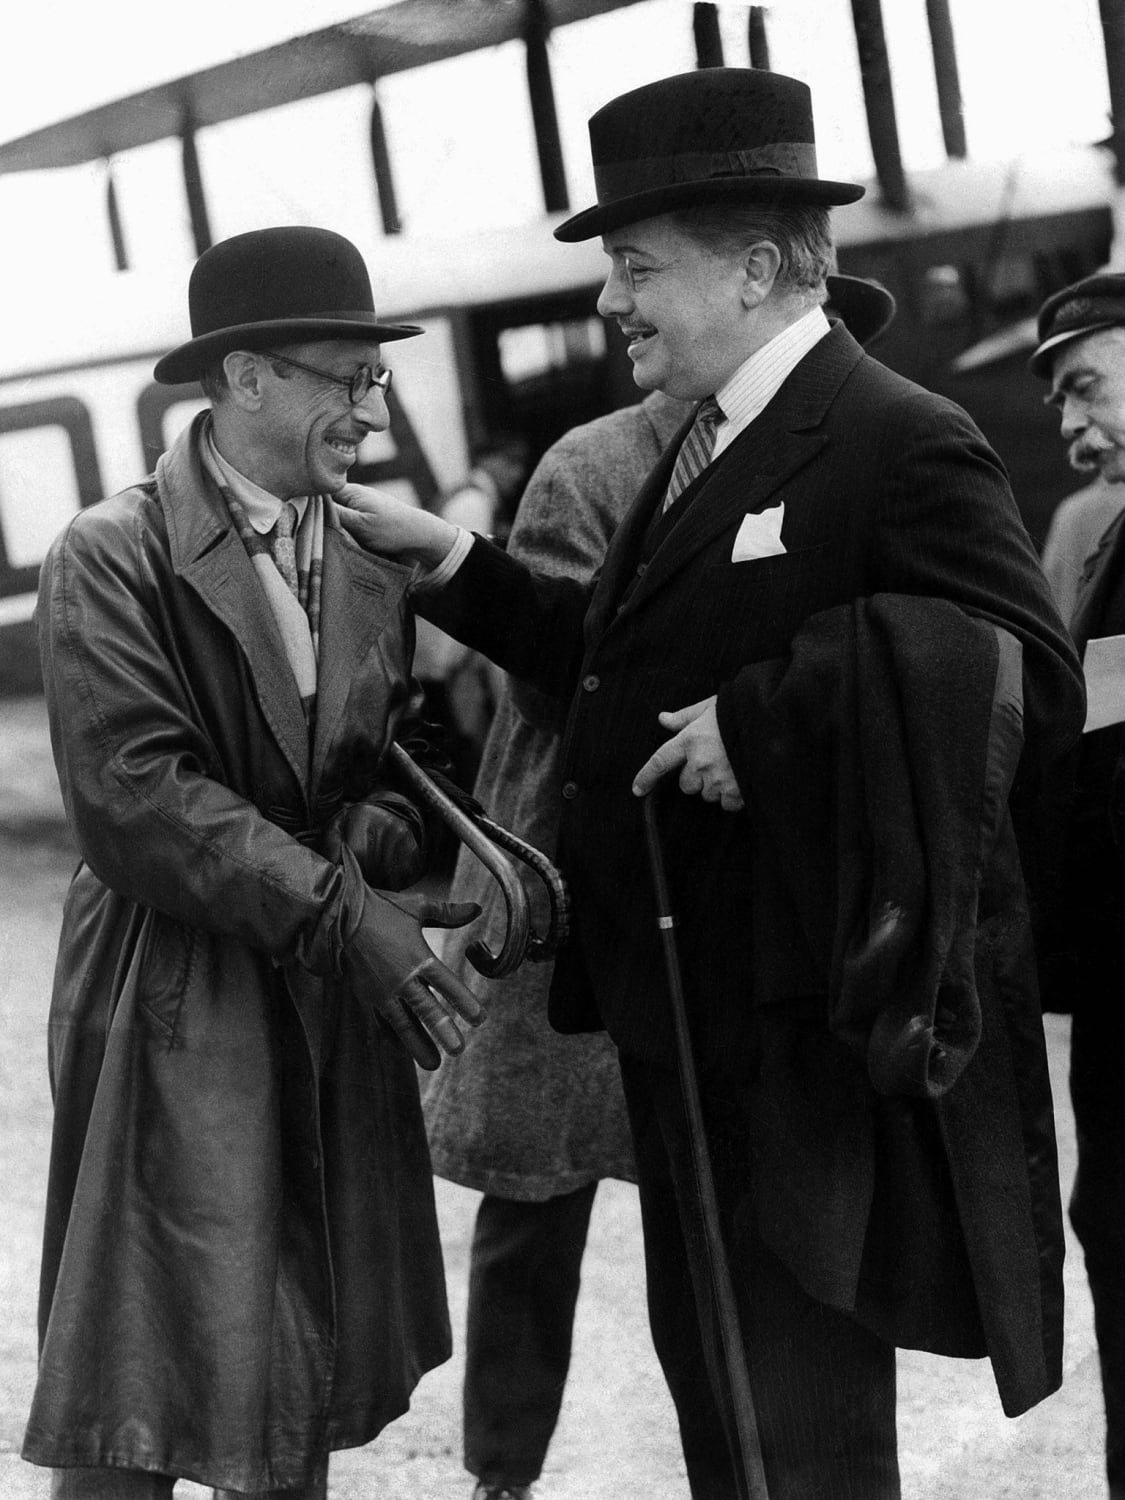 Stravinsky and Diaghilev reunite at the Croydon Airport, 1926. Serge Diaghilev, founder of the Ballets Russes, commissioned all the early Stravinsky ballets, along with Les Noces and Pulcinella.